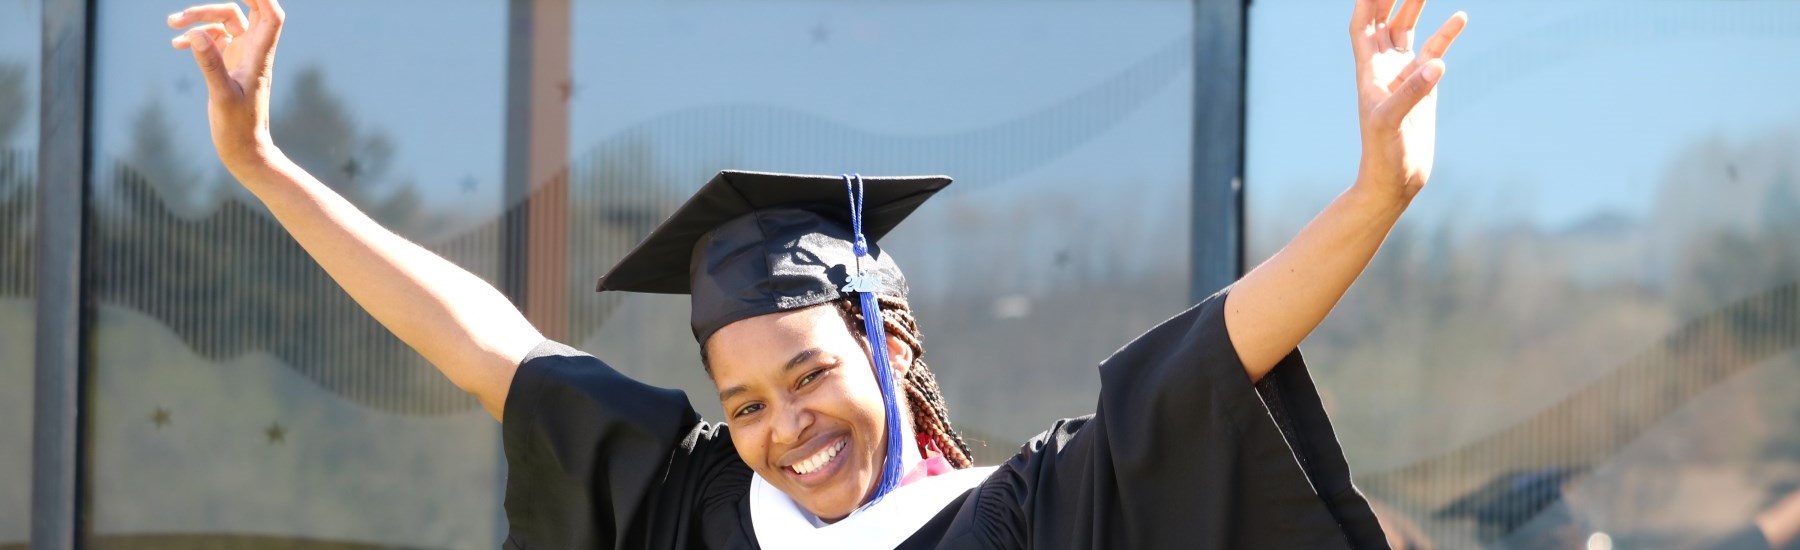 students wearing graduation cap and gown smiling 